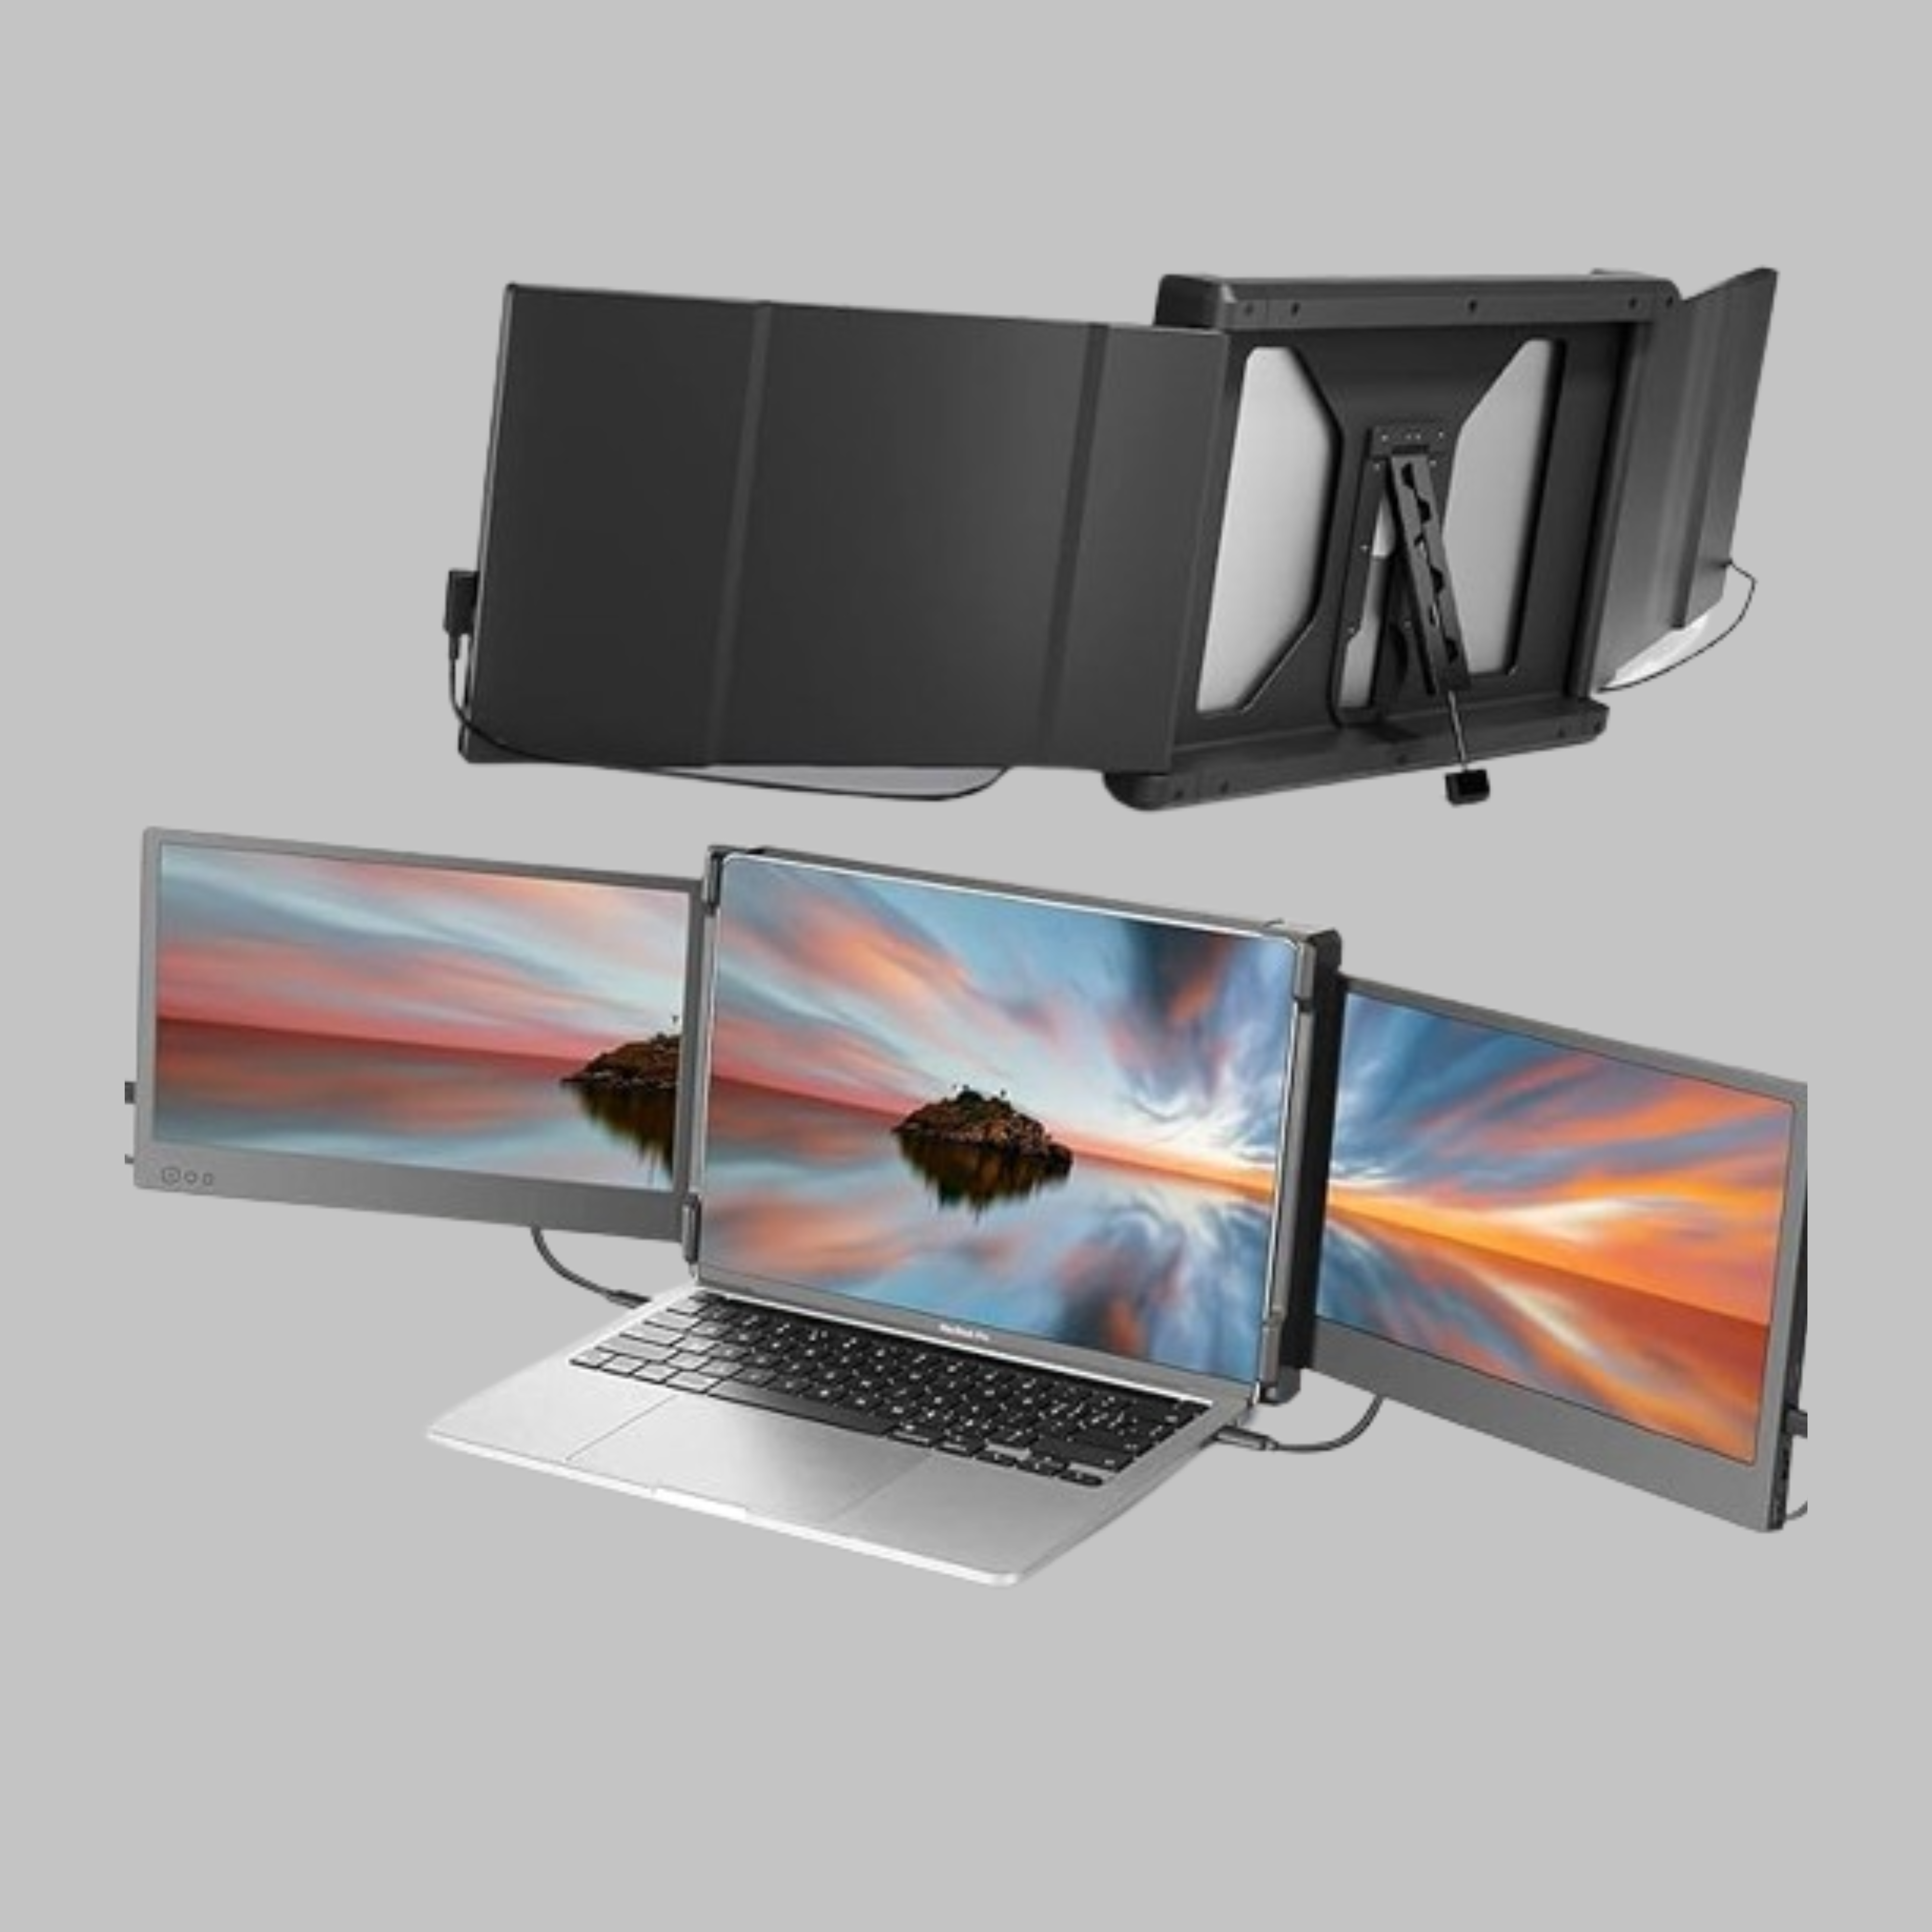 TeamEdge FlexScreen Portable Monitor Boost, Your Productivity with Triple Screen Efficiency.